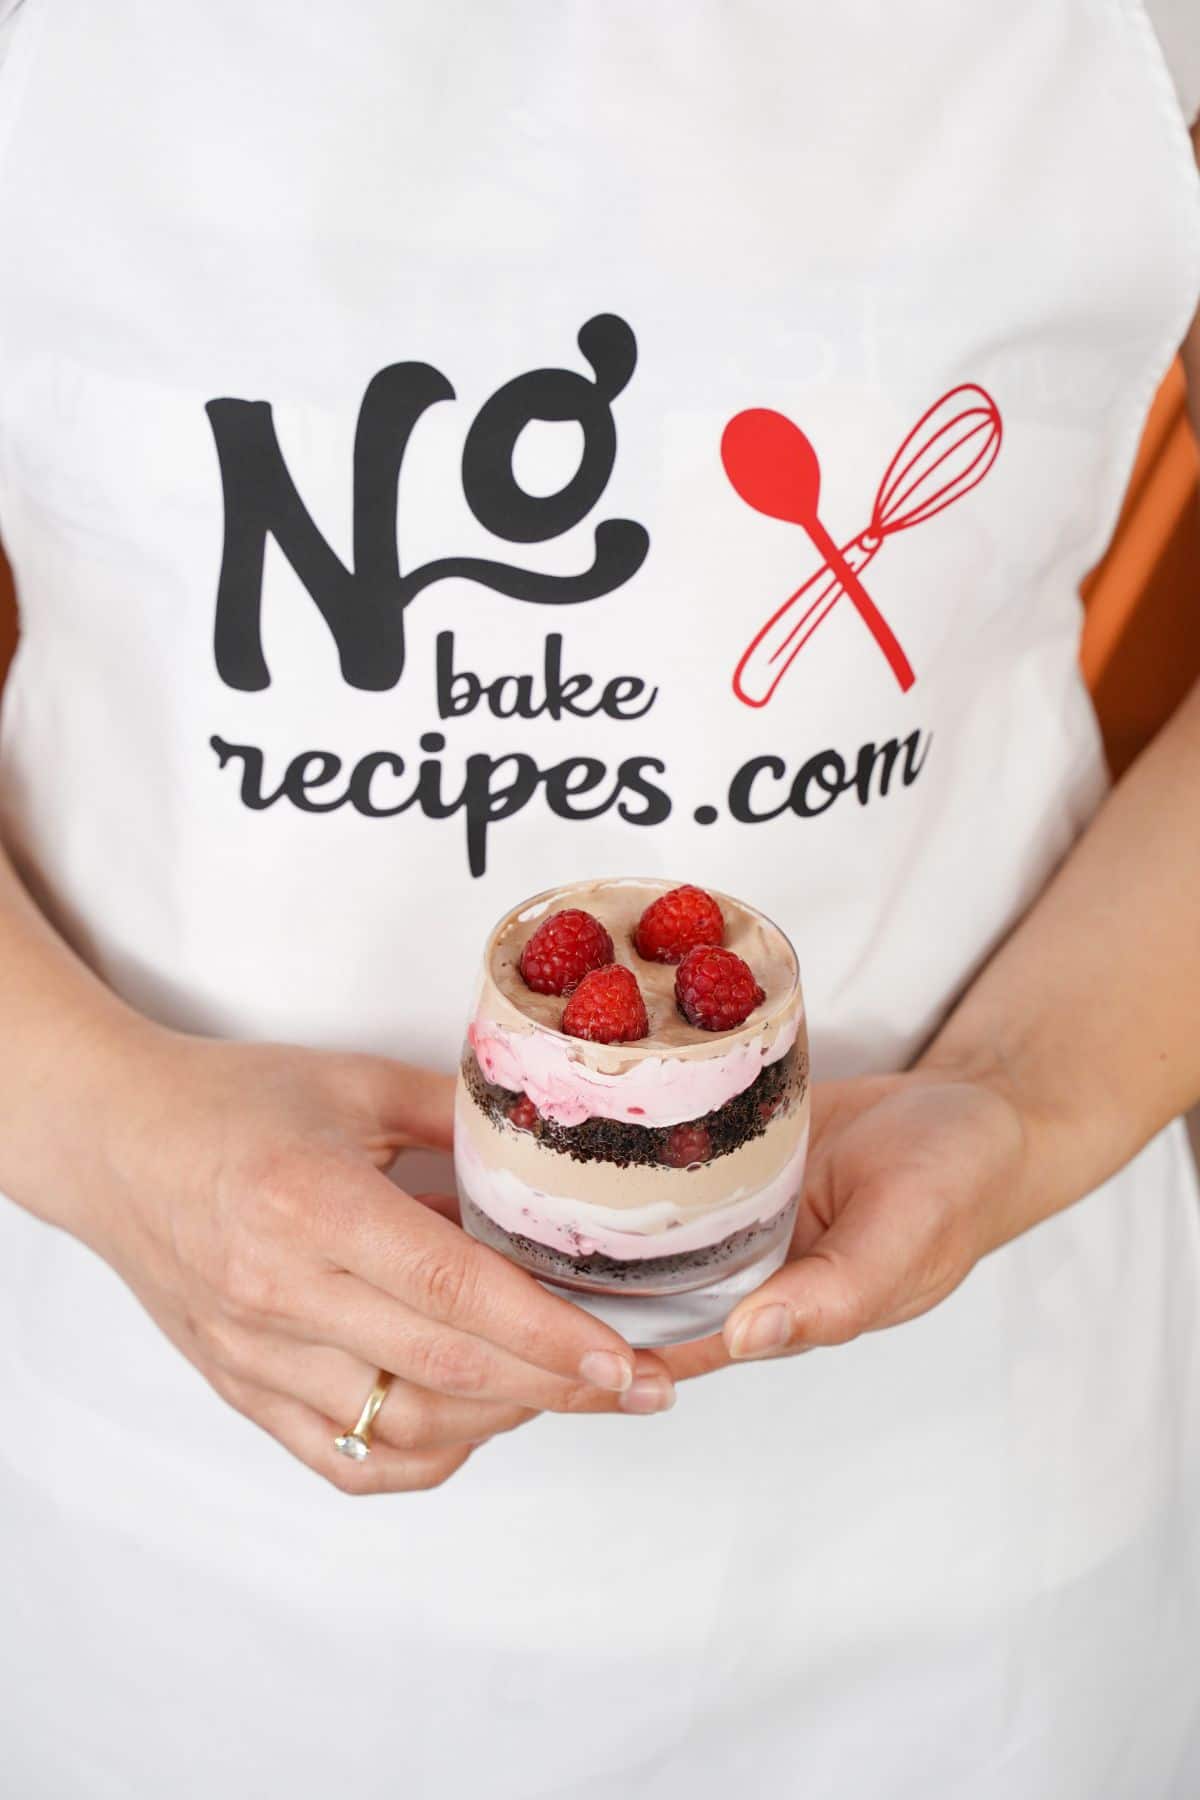 Woman in no bake recipes apron holding parfait in glass topped with raspberries